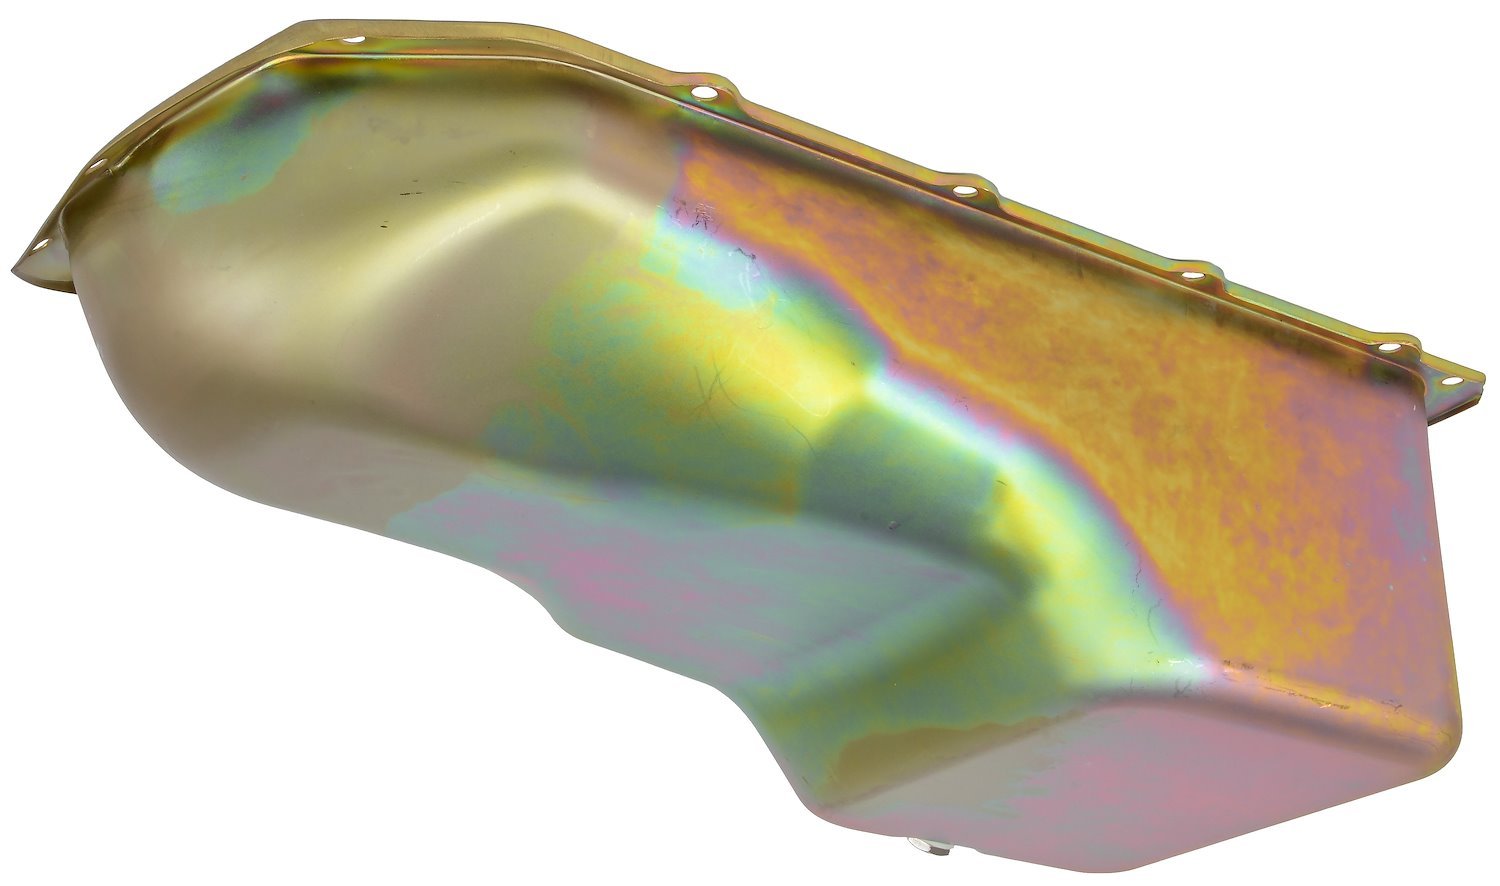 Stock-Style Replacement Oil Pan for 1974-1981 Pontiac 301-455 [Gold Zinc]